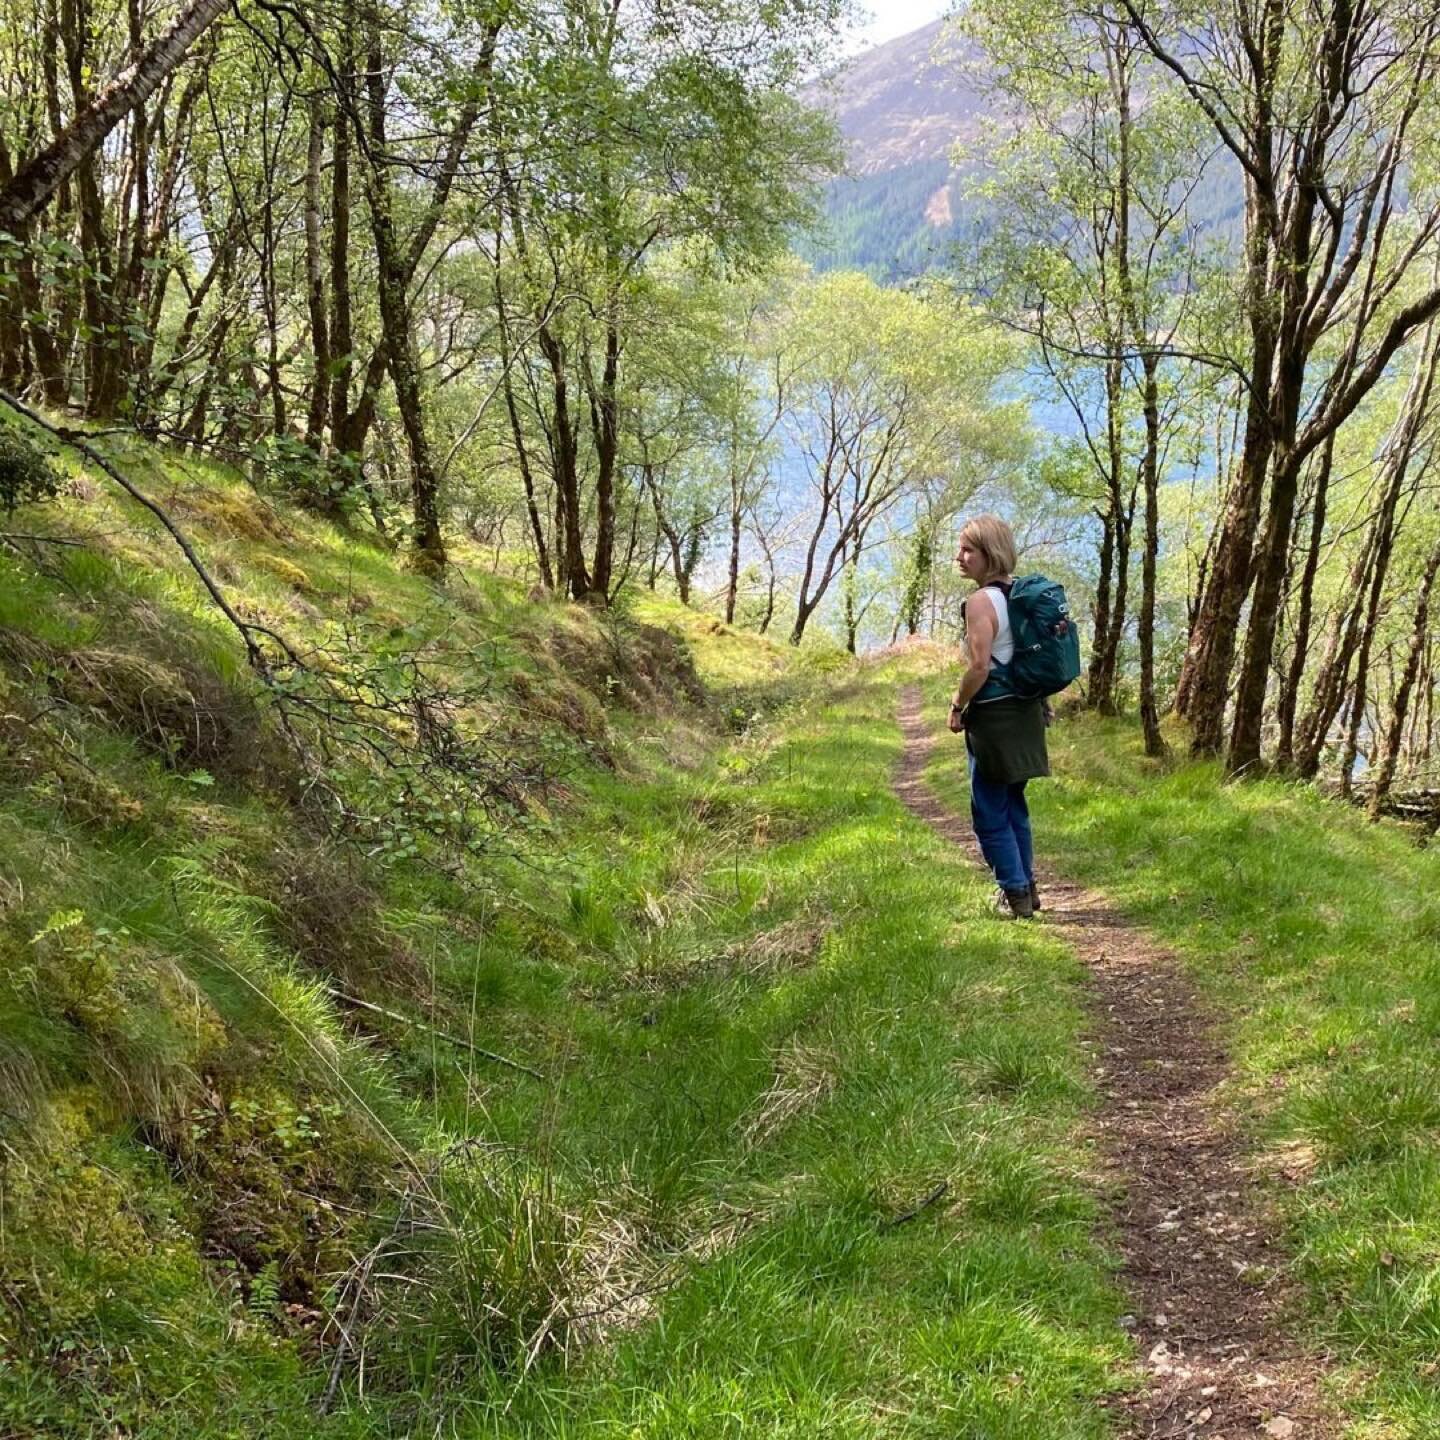 Ancient woodland at the end of the stunning Ardintoul Circuit walk which begins straight out of the door of Taigh Whin, following forestry paths up and then down to reach the little visited shores of Loch Alsh (a wonderful place to spot otters) befor